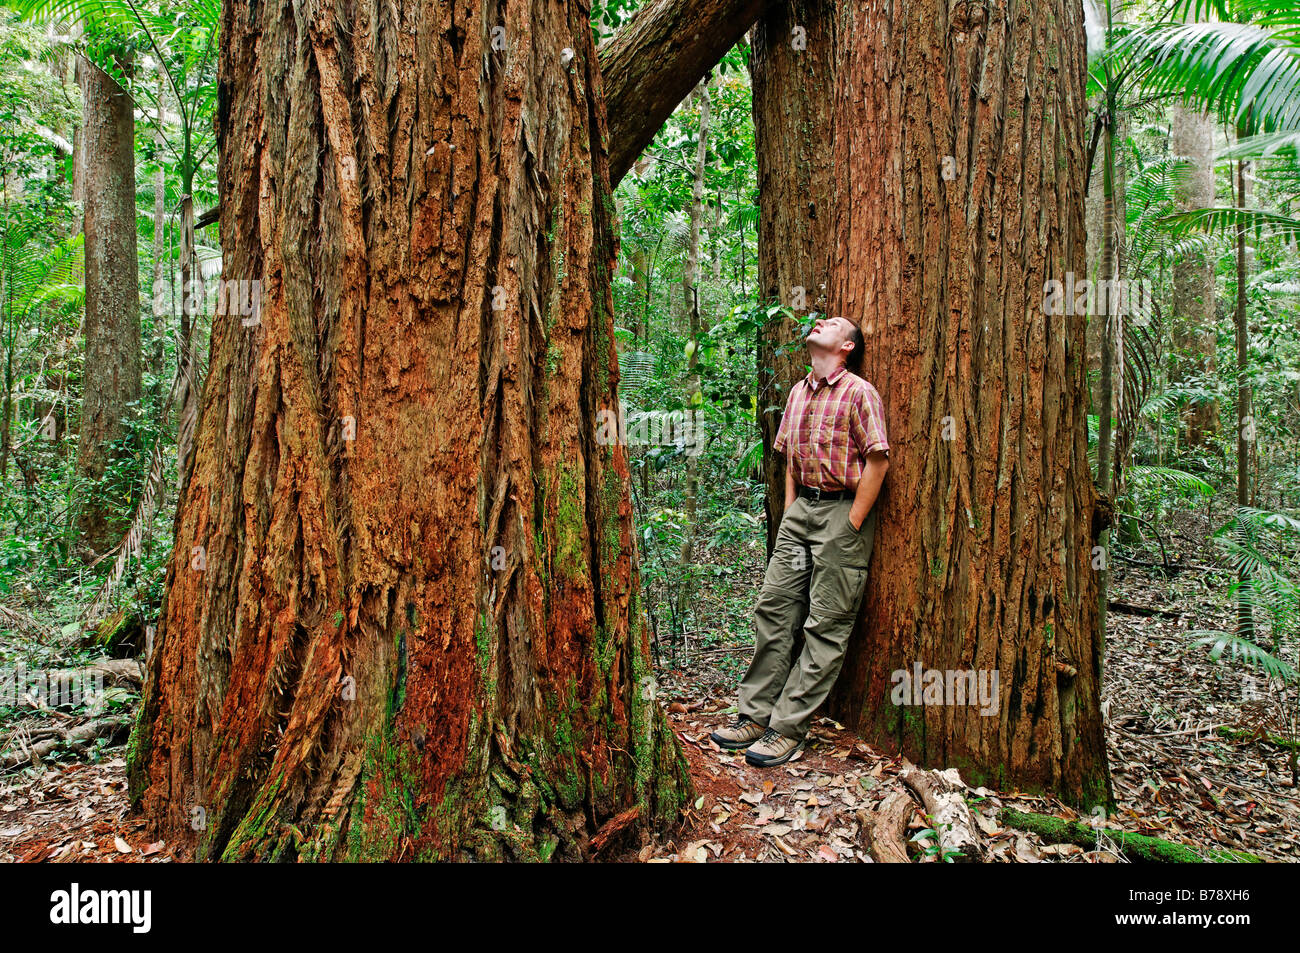 Man in a rainforest with Turpentine trees (Syncarpia hillii), Fraser Island, Queensland, Australia Stock Photo